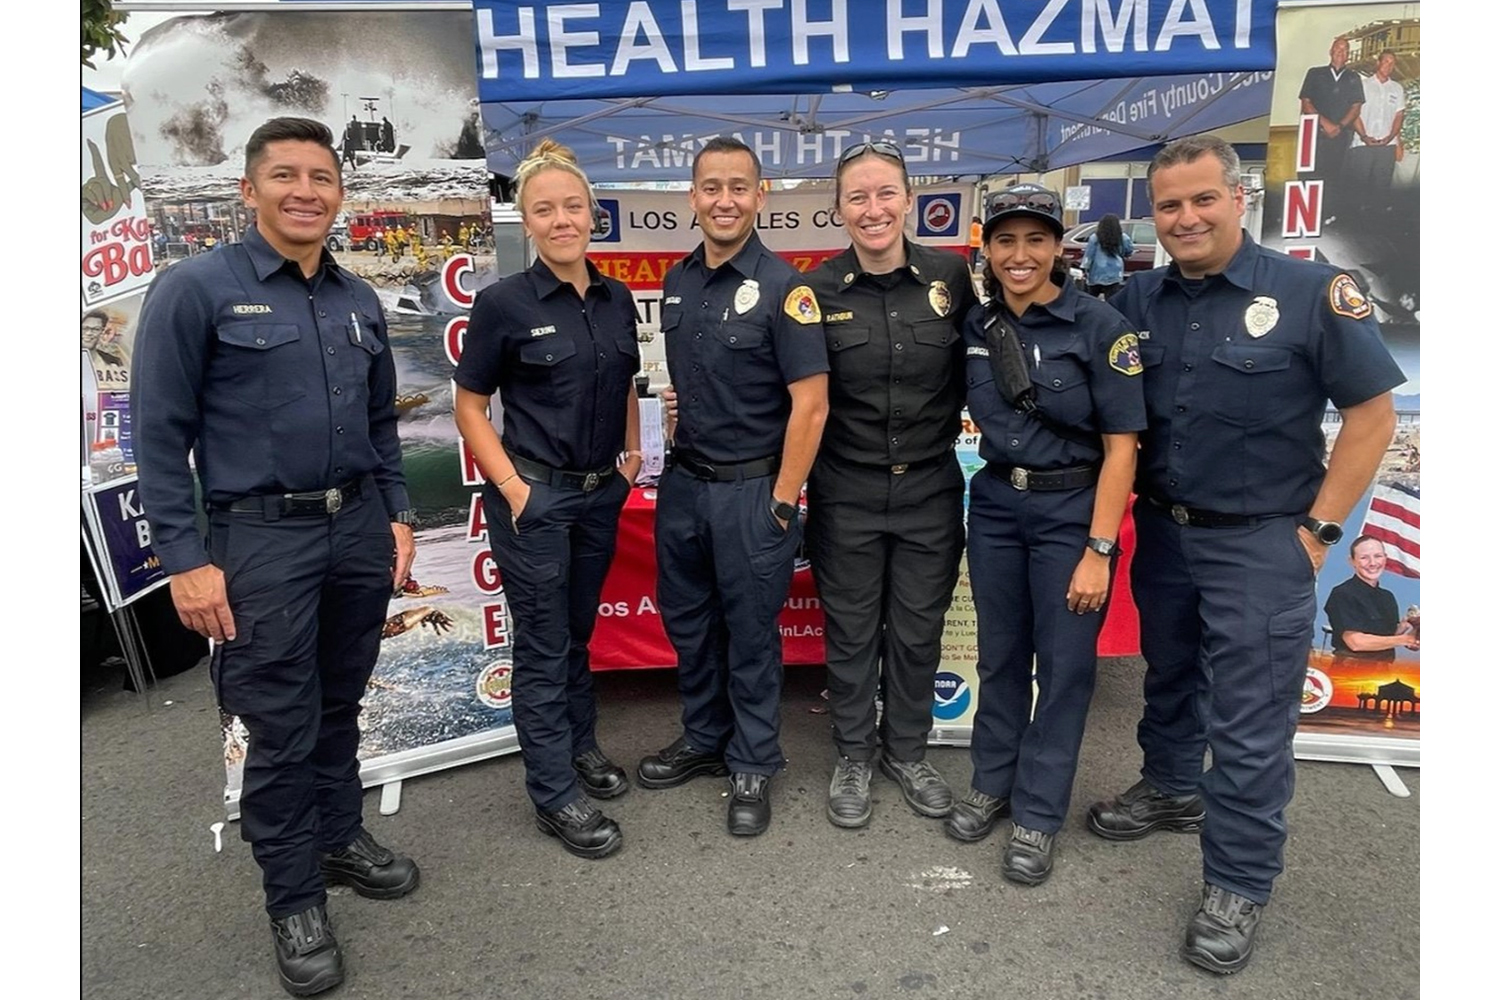 On Saturday, October 15, 2022, staff from the Los Angeles County Fire Department (LACoFD) Health Hazardous Materials Division (HHMD) joined members of the Lifeguard Division at the 17th annual Taste of Soul Family Festival in South Los Angeles.